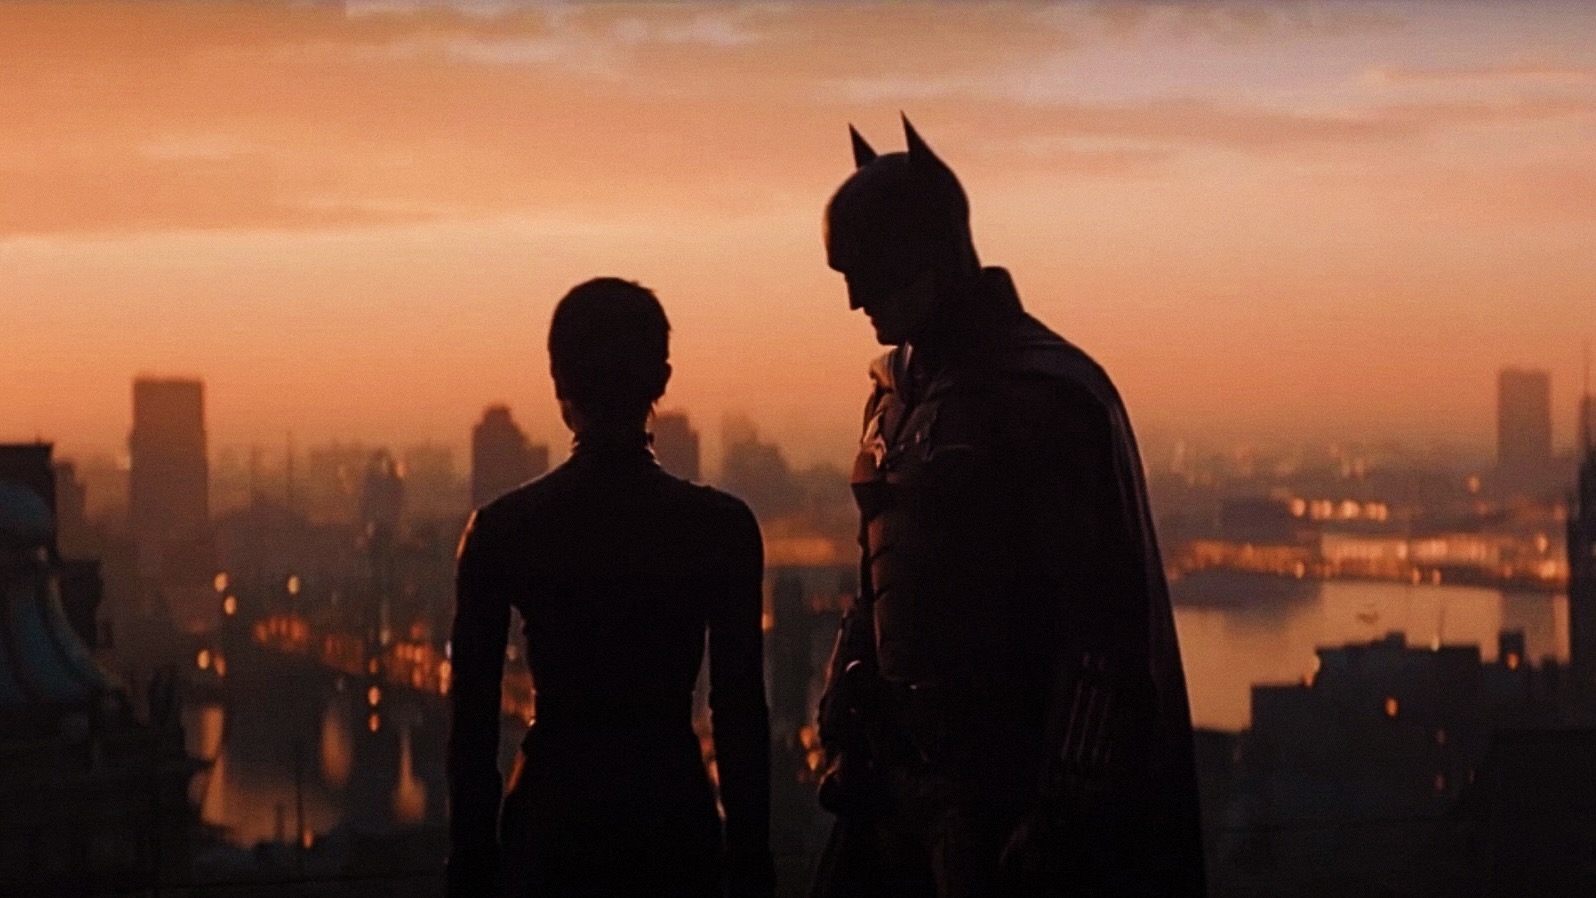 Zoe Kravitz and Robert Pattinson in silhouette as Batman and Catwoman in The Batman - when is the batman streaming on hbo max